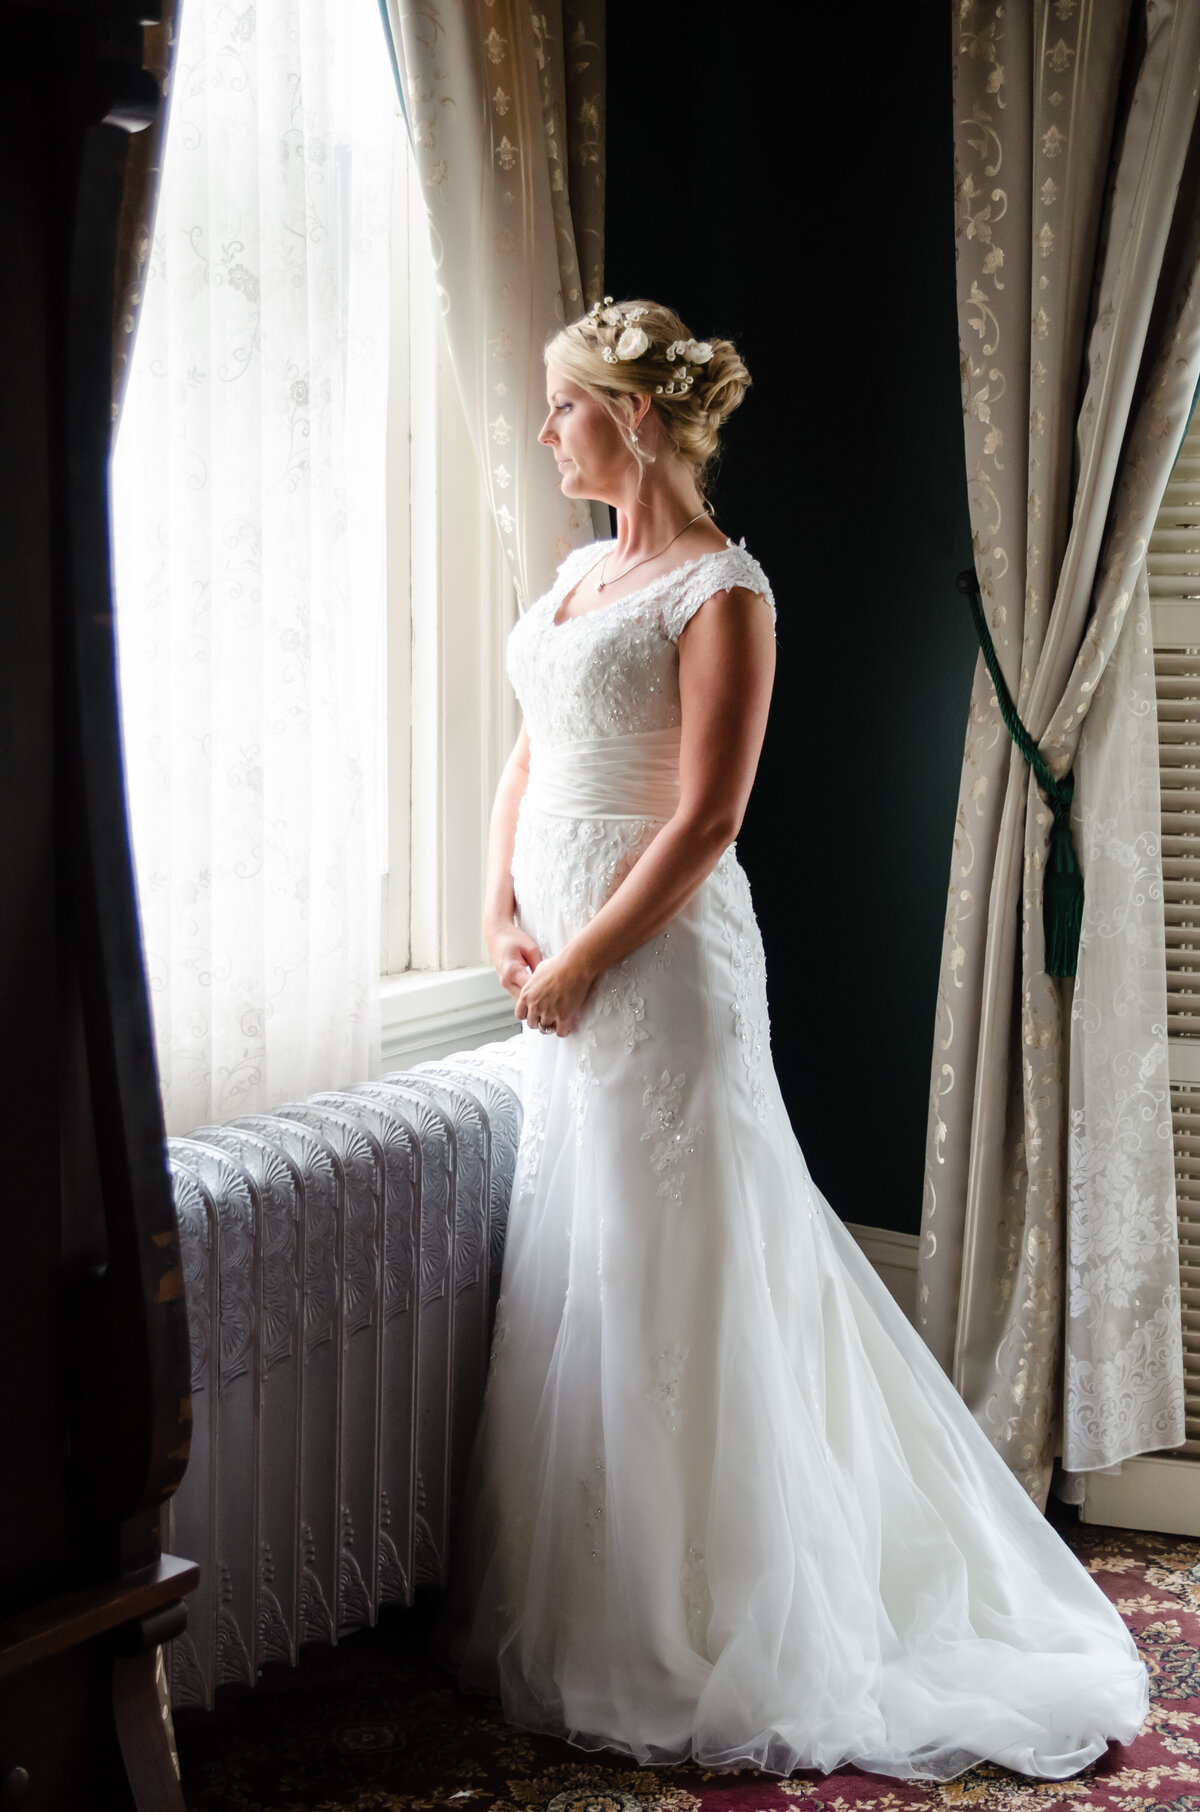 Beautiful bridal portrait photography: Bride gazes out the window of the Columns Hotel on St. Charles in New Orleans, LA